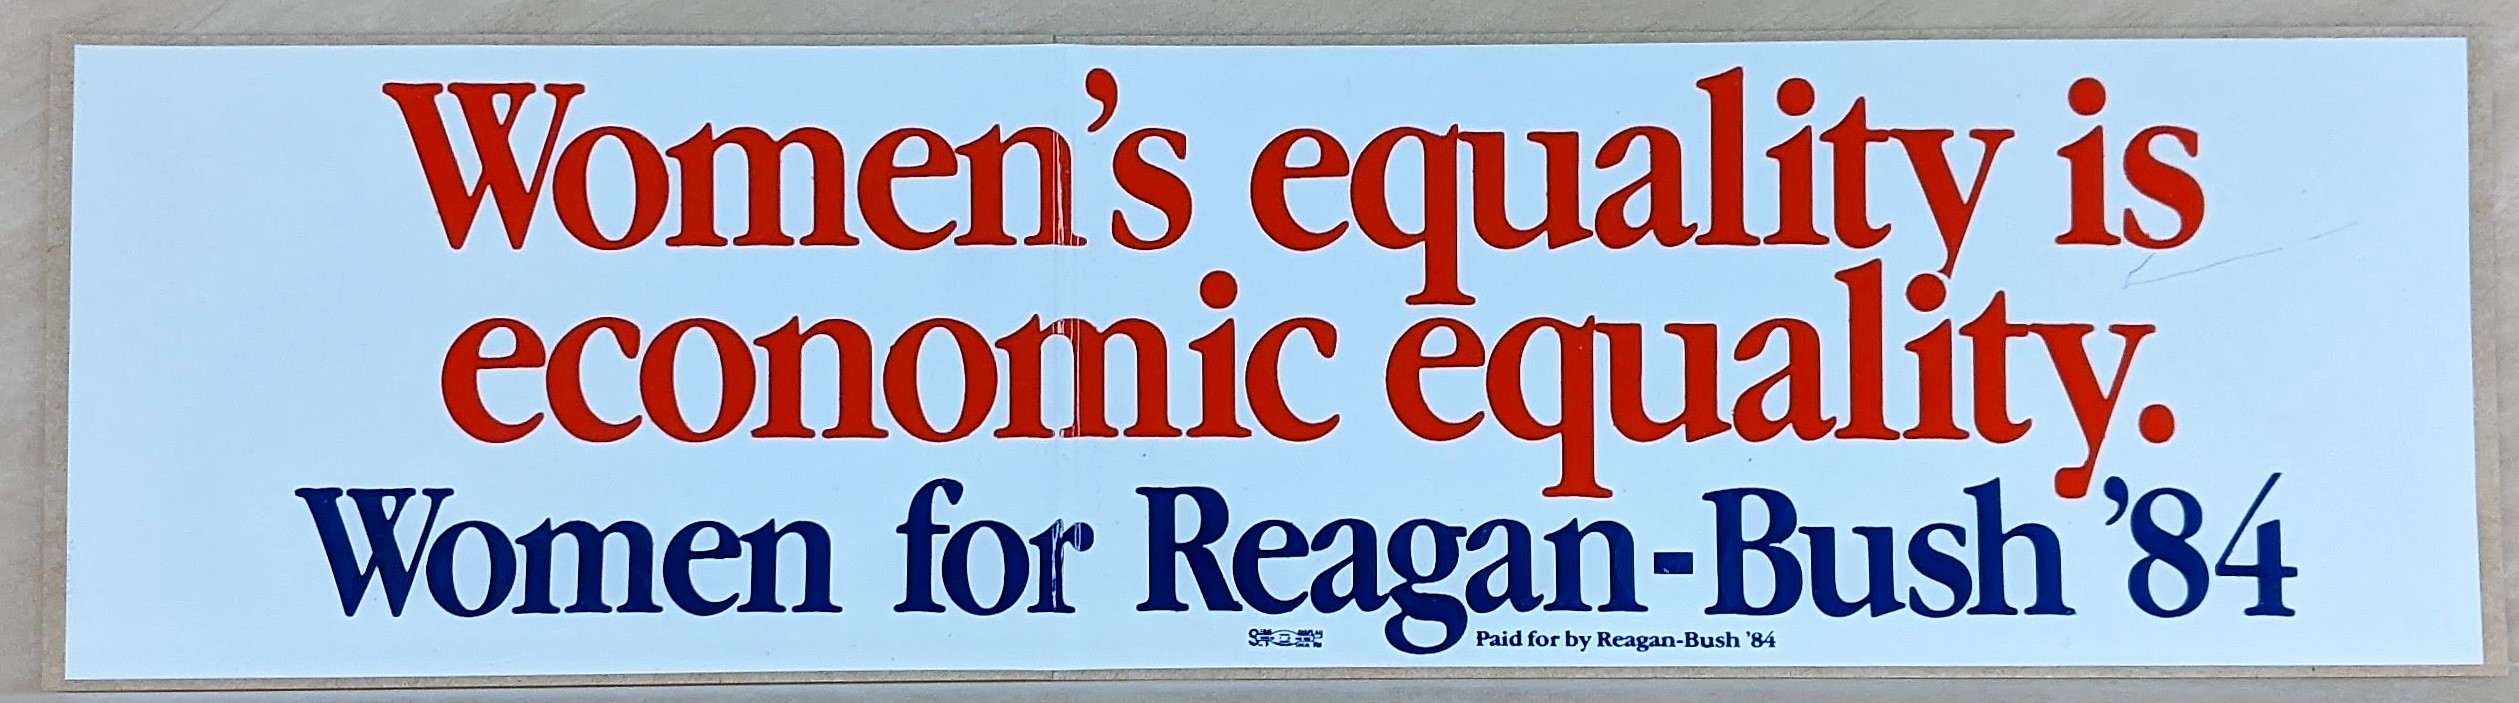 Creator unknown, “Women’s equality is economic equality. Women for Reagan-Bush ’84” bumper sticker, 1984, from the Jerome O. Herlihy political campaign ephemera collection